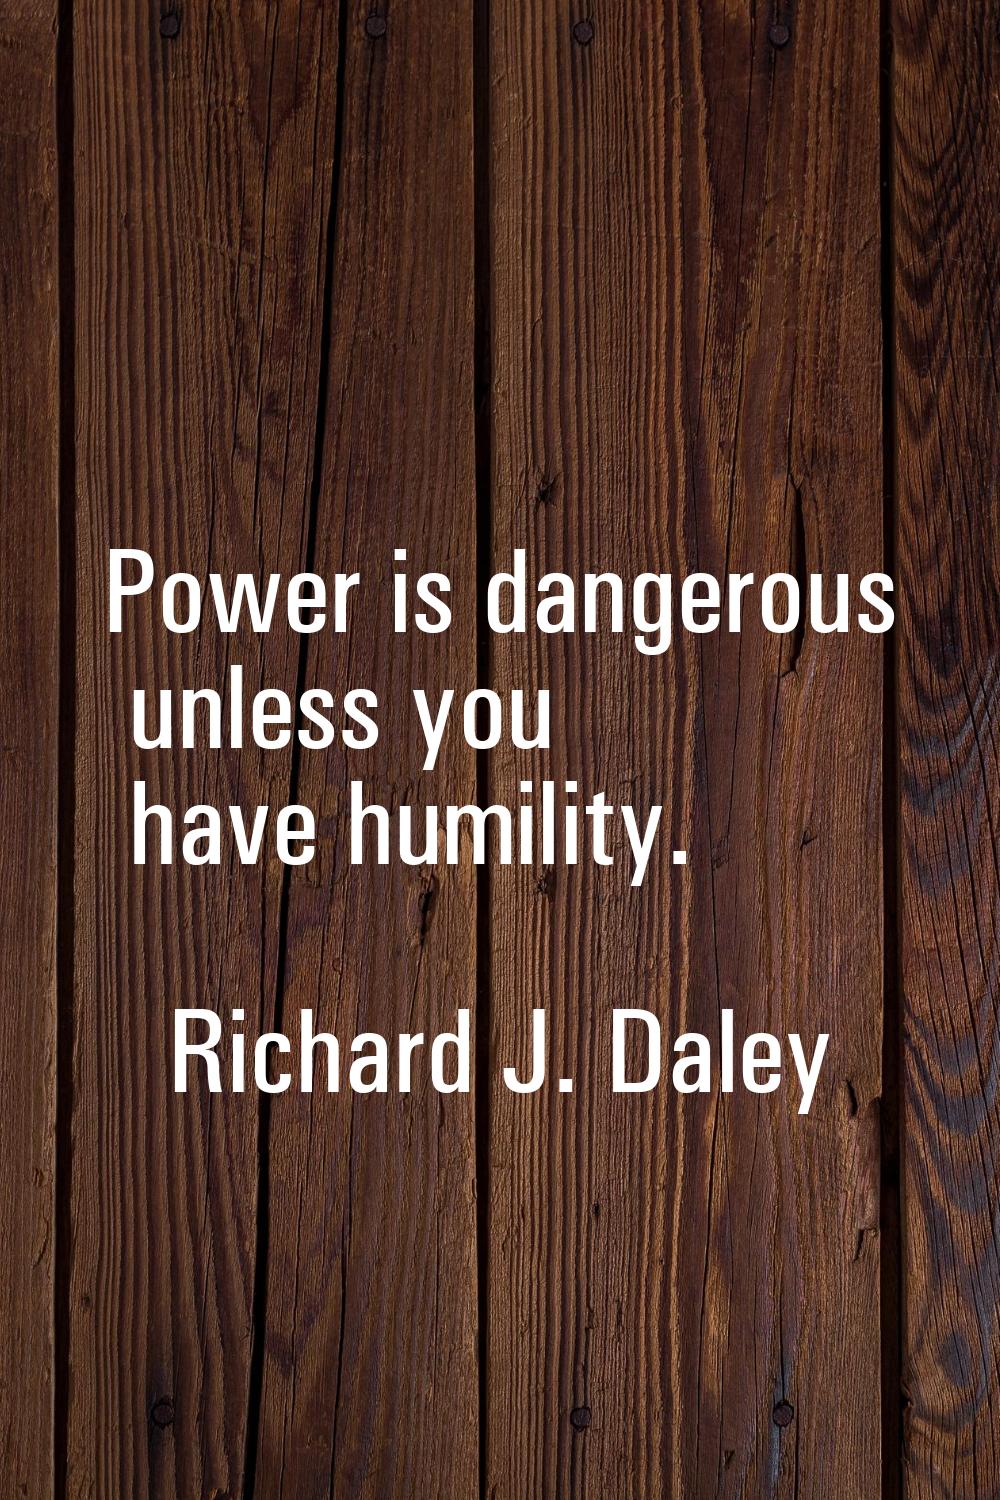 Power is dangerous unless you have humility.